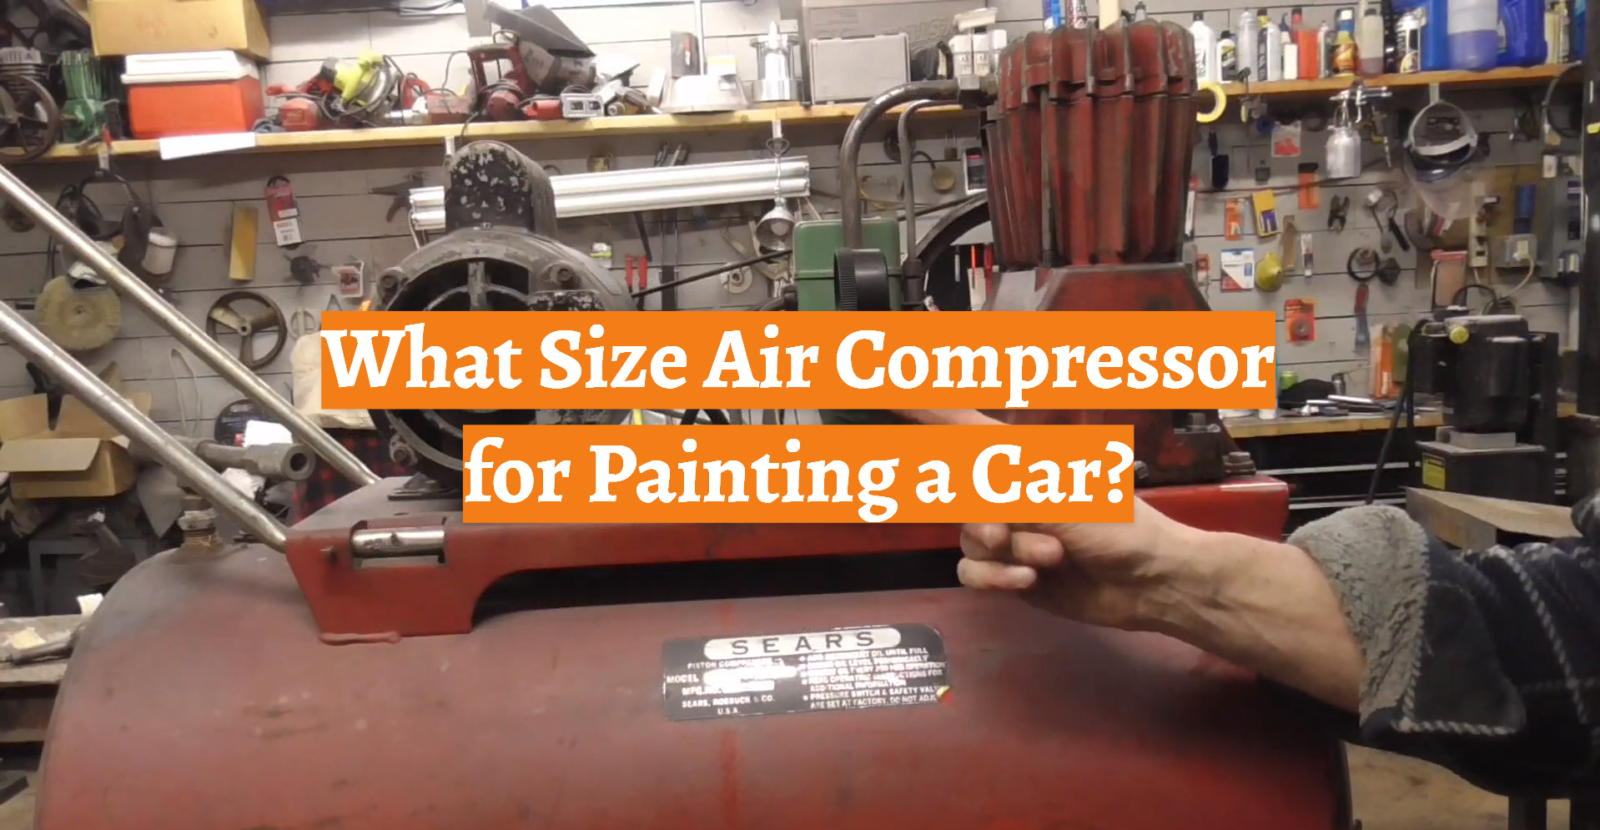 What Size Air Compressor for Painting a Car?